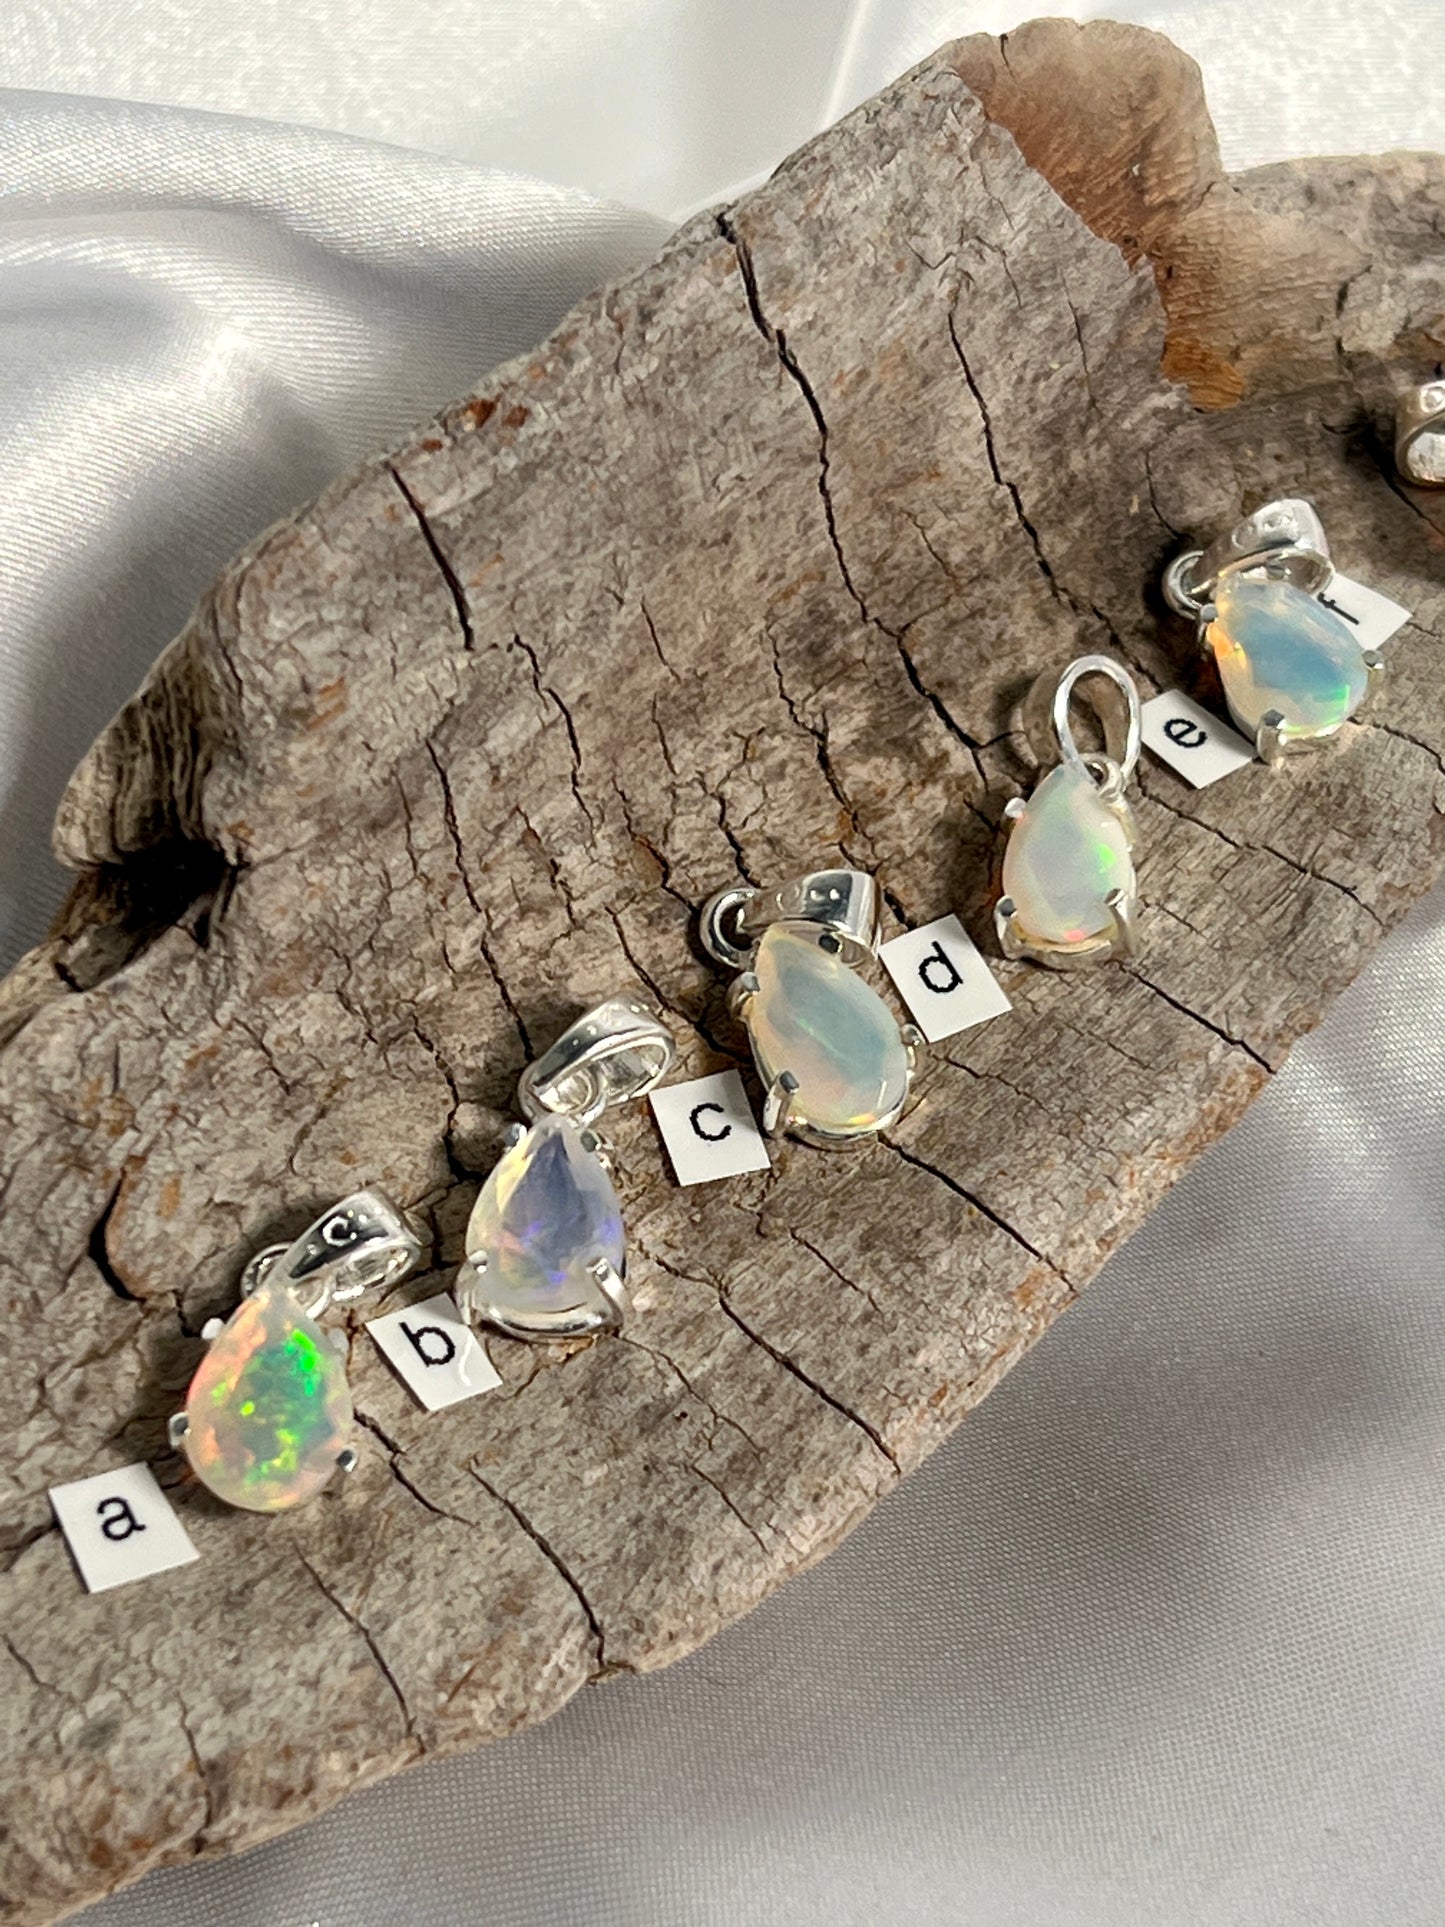 A stunning Dainty Prong Set Facet Cut Teardrop Shaped Ethiopian Opal pendant, delicately crafted with genuine Super Silver settings, suspended on a piece of wood.